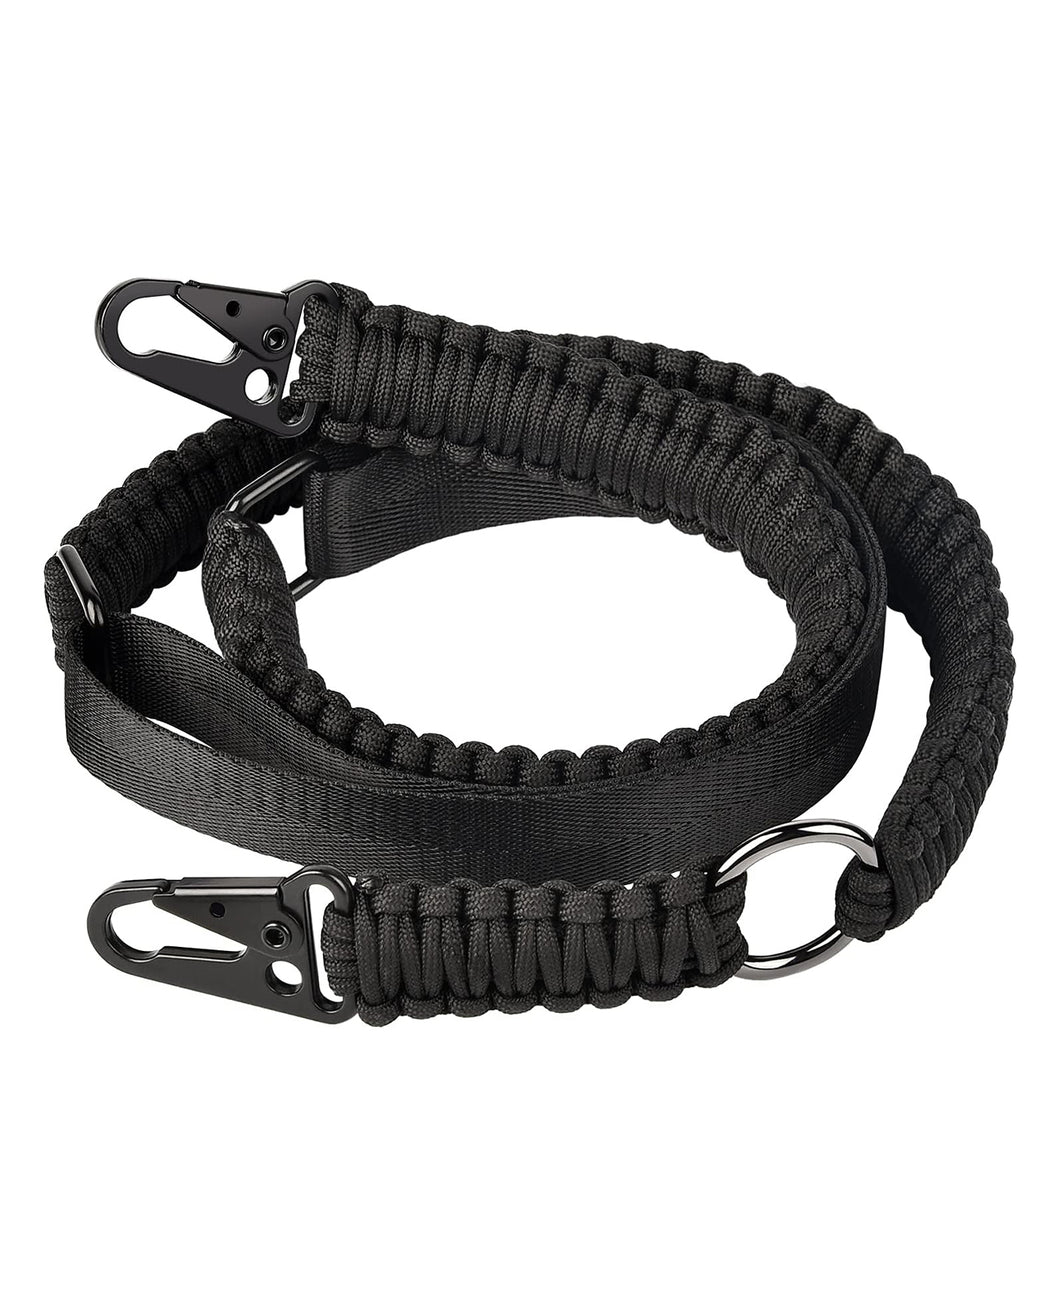 550 Paracord Sling Adjustable Length with Larger Opening Metal Hook